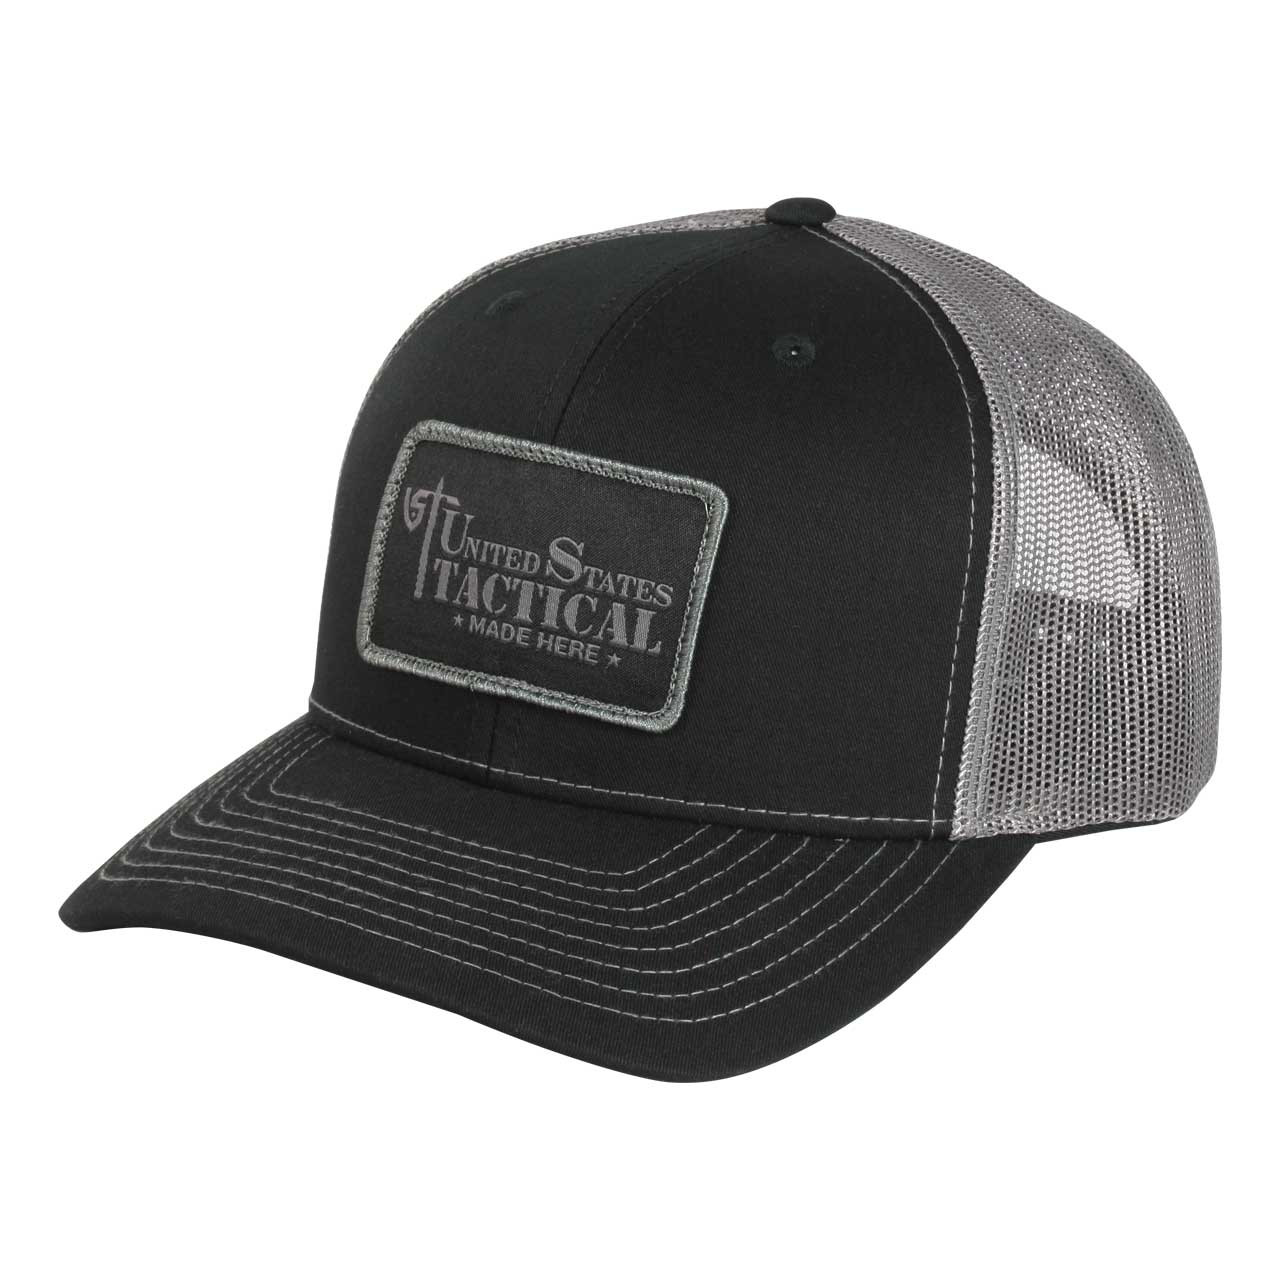 Black & Gray Structured Mesh Back Cap with Patch